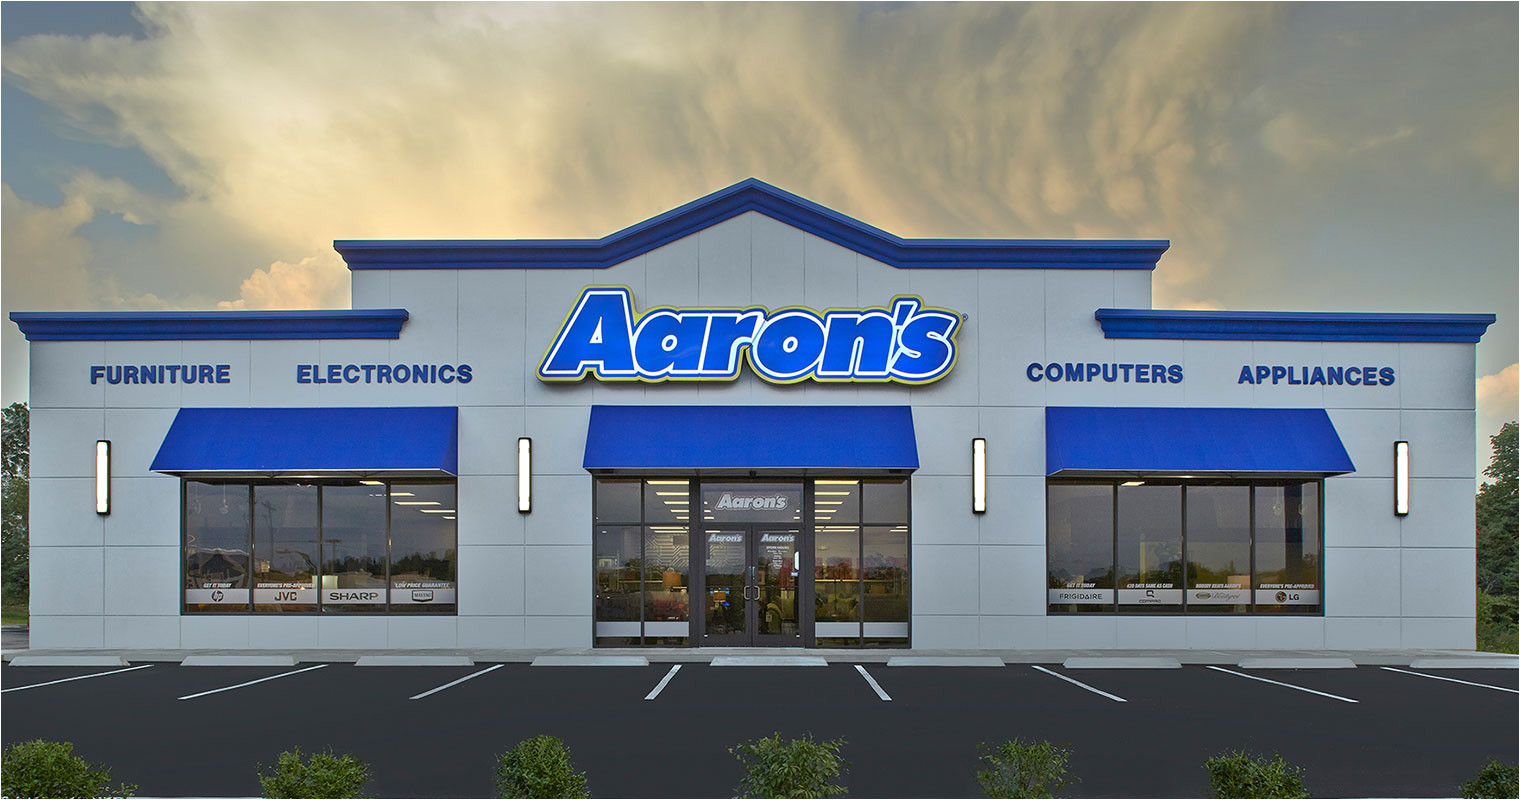 aaron s stores footer image